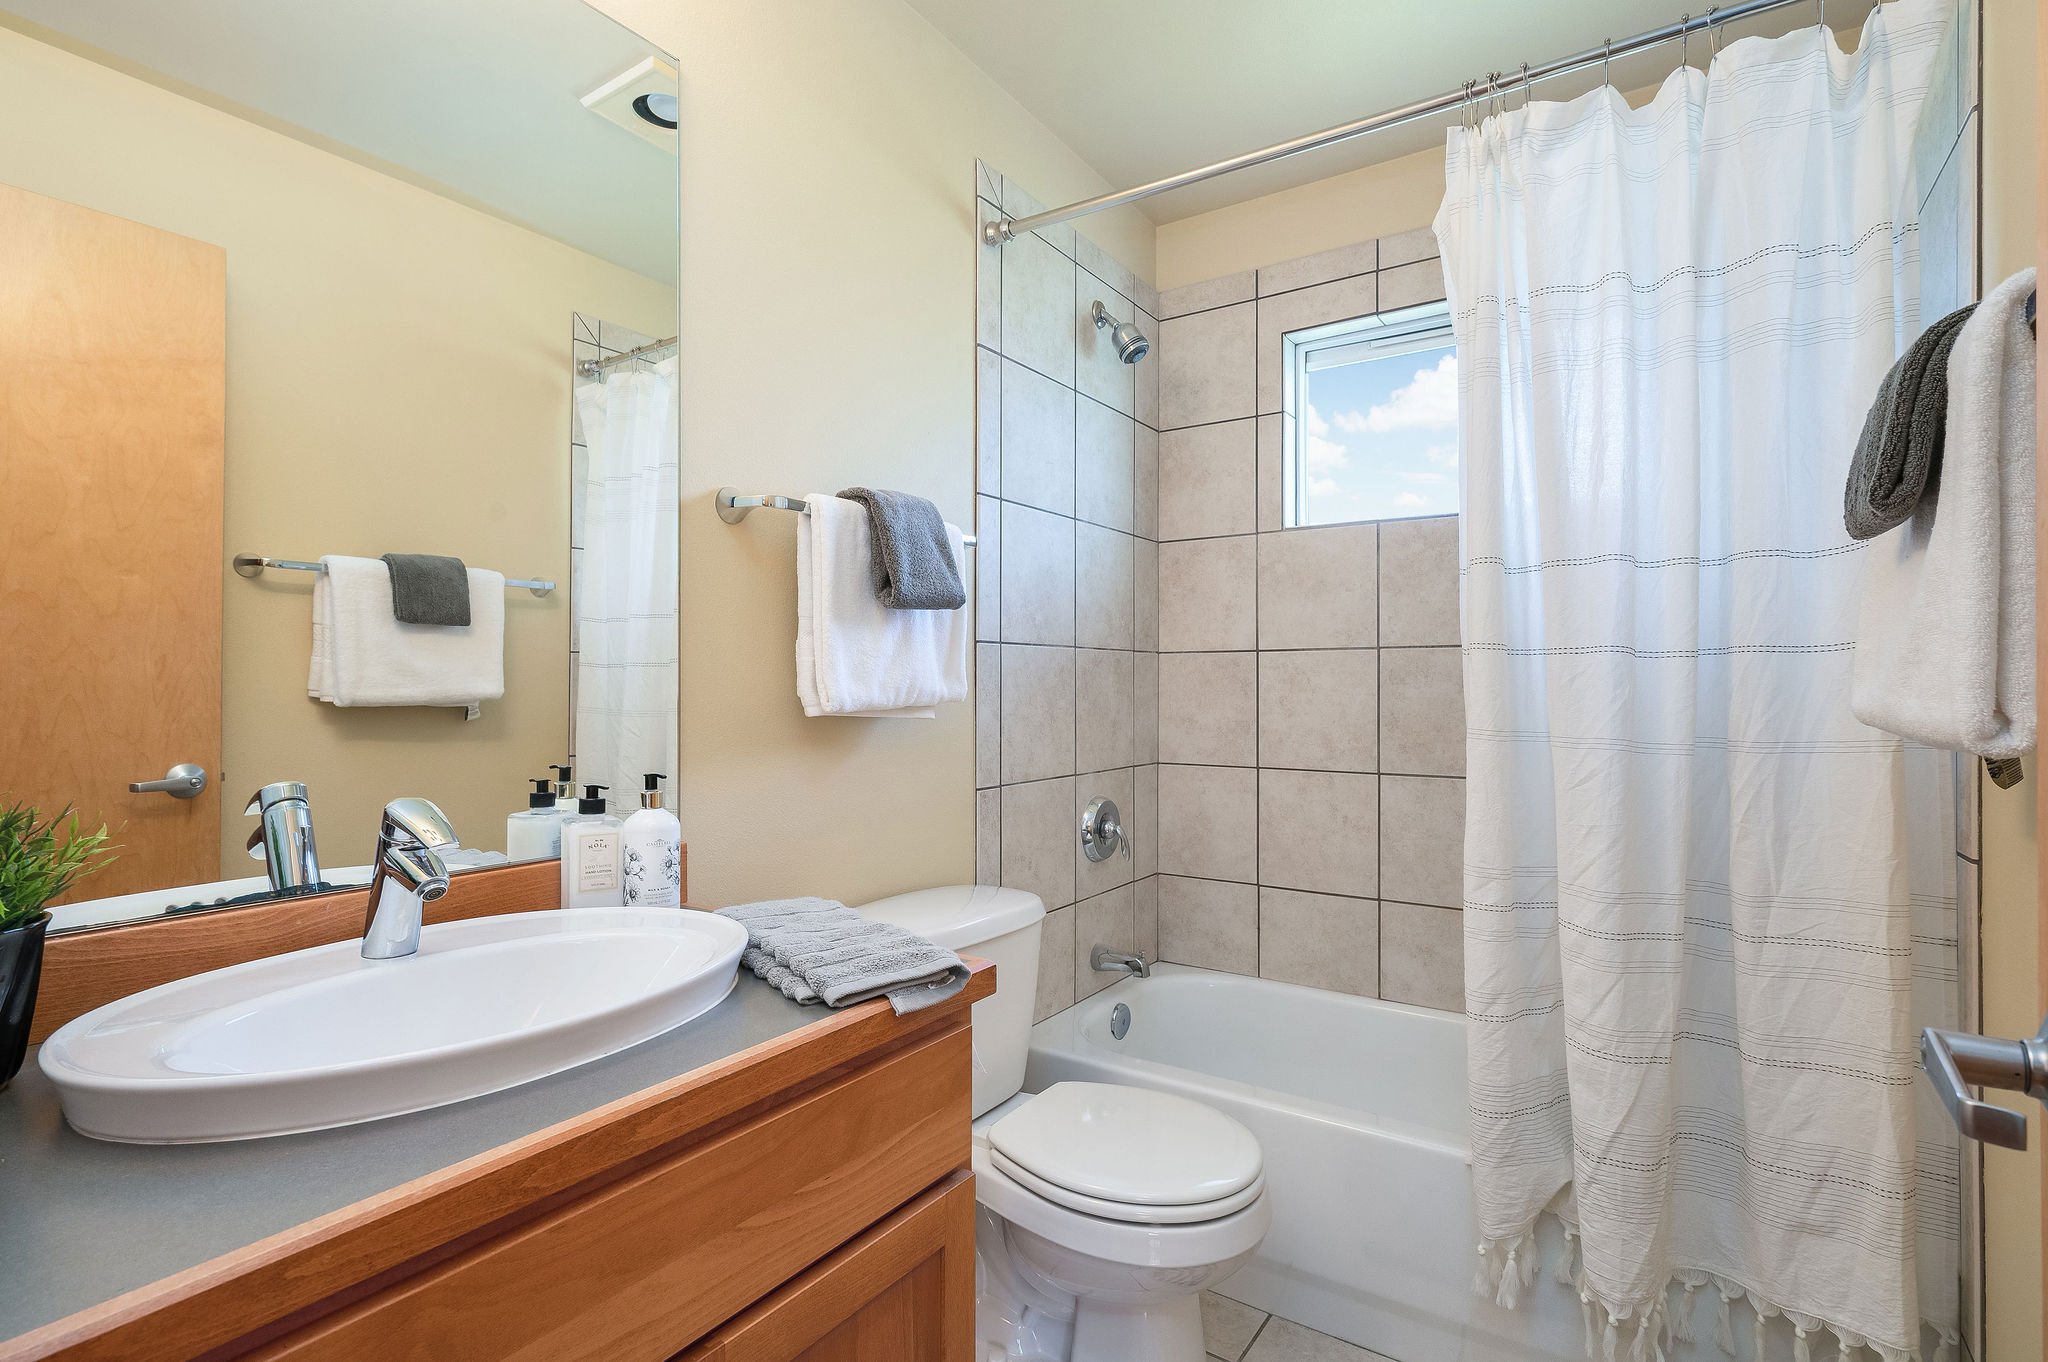  Image description: interior of bathroom with bathtub and shower combo and small window 